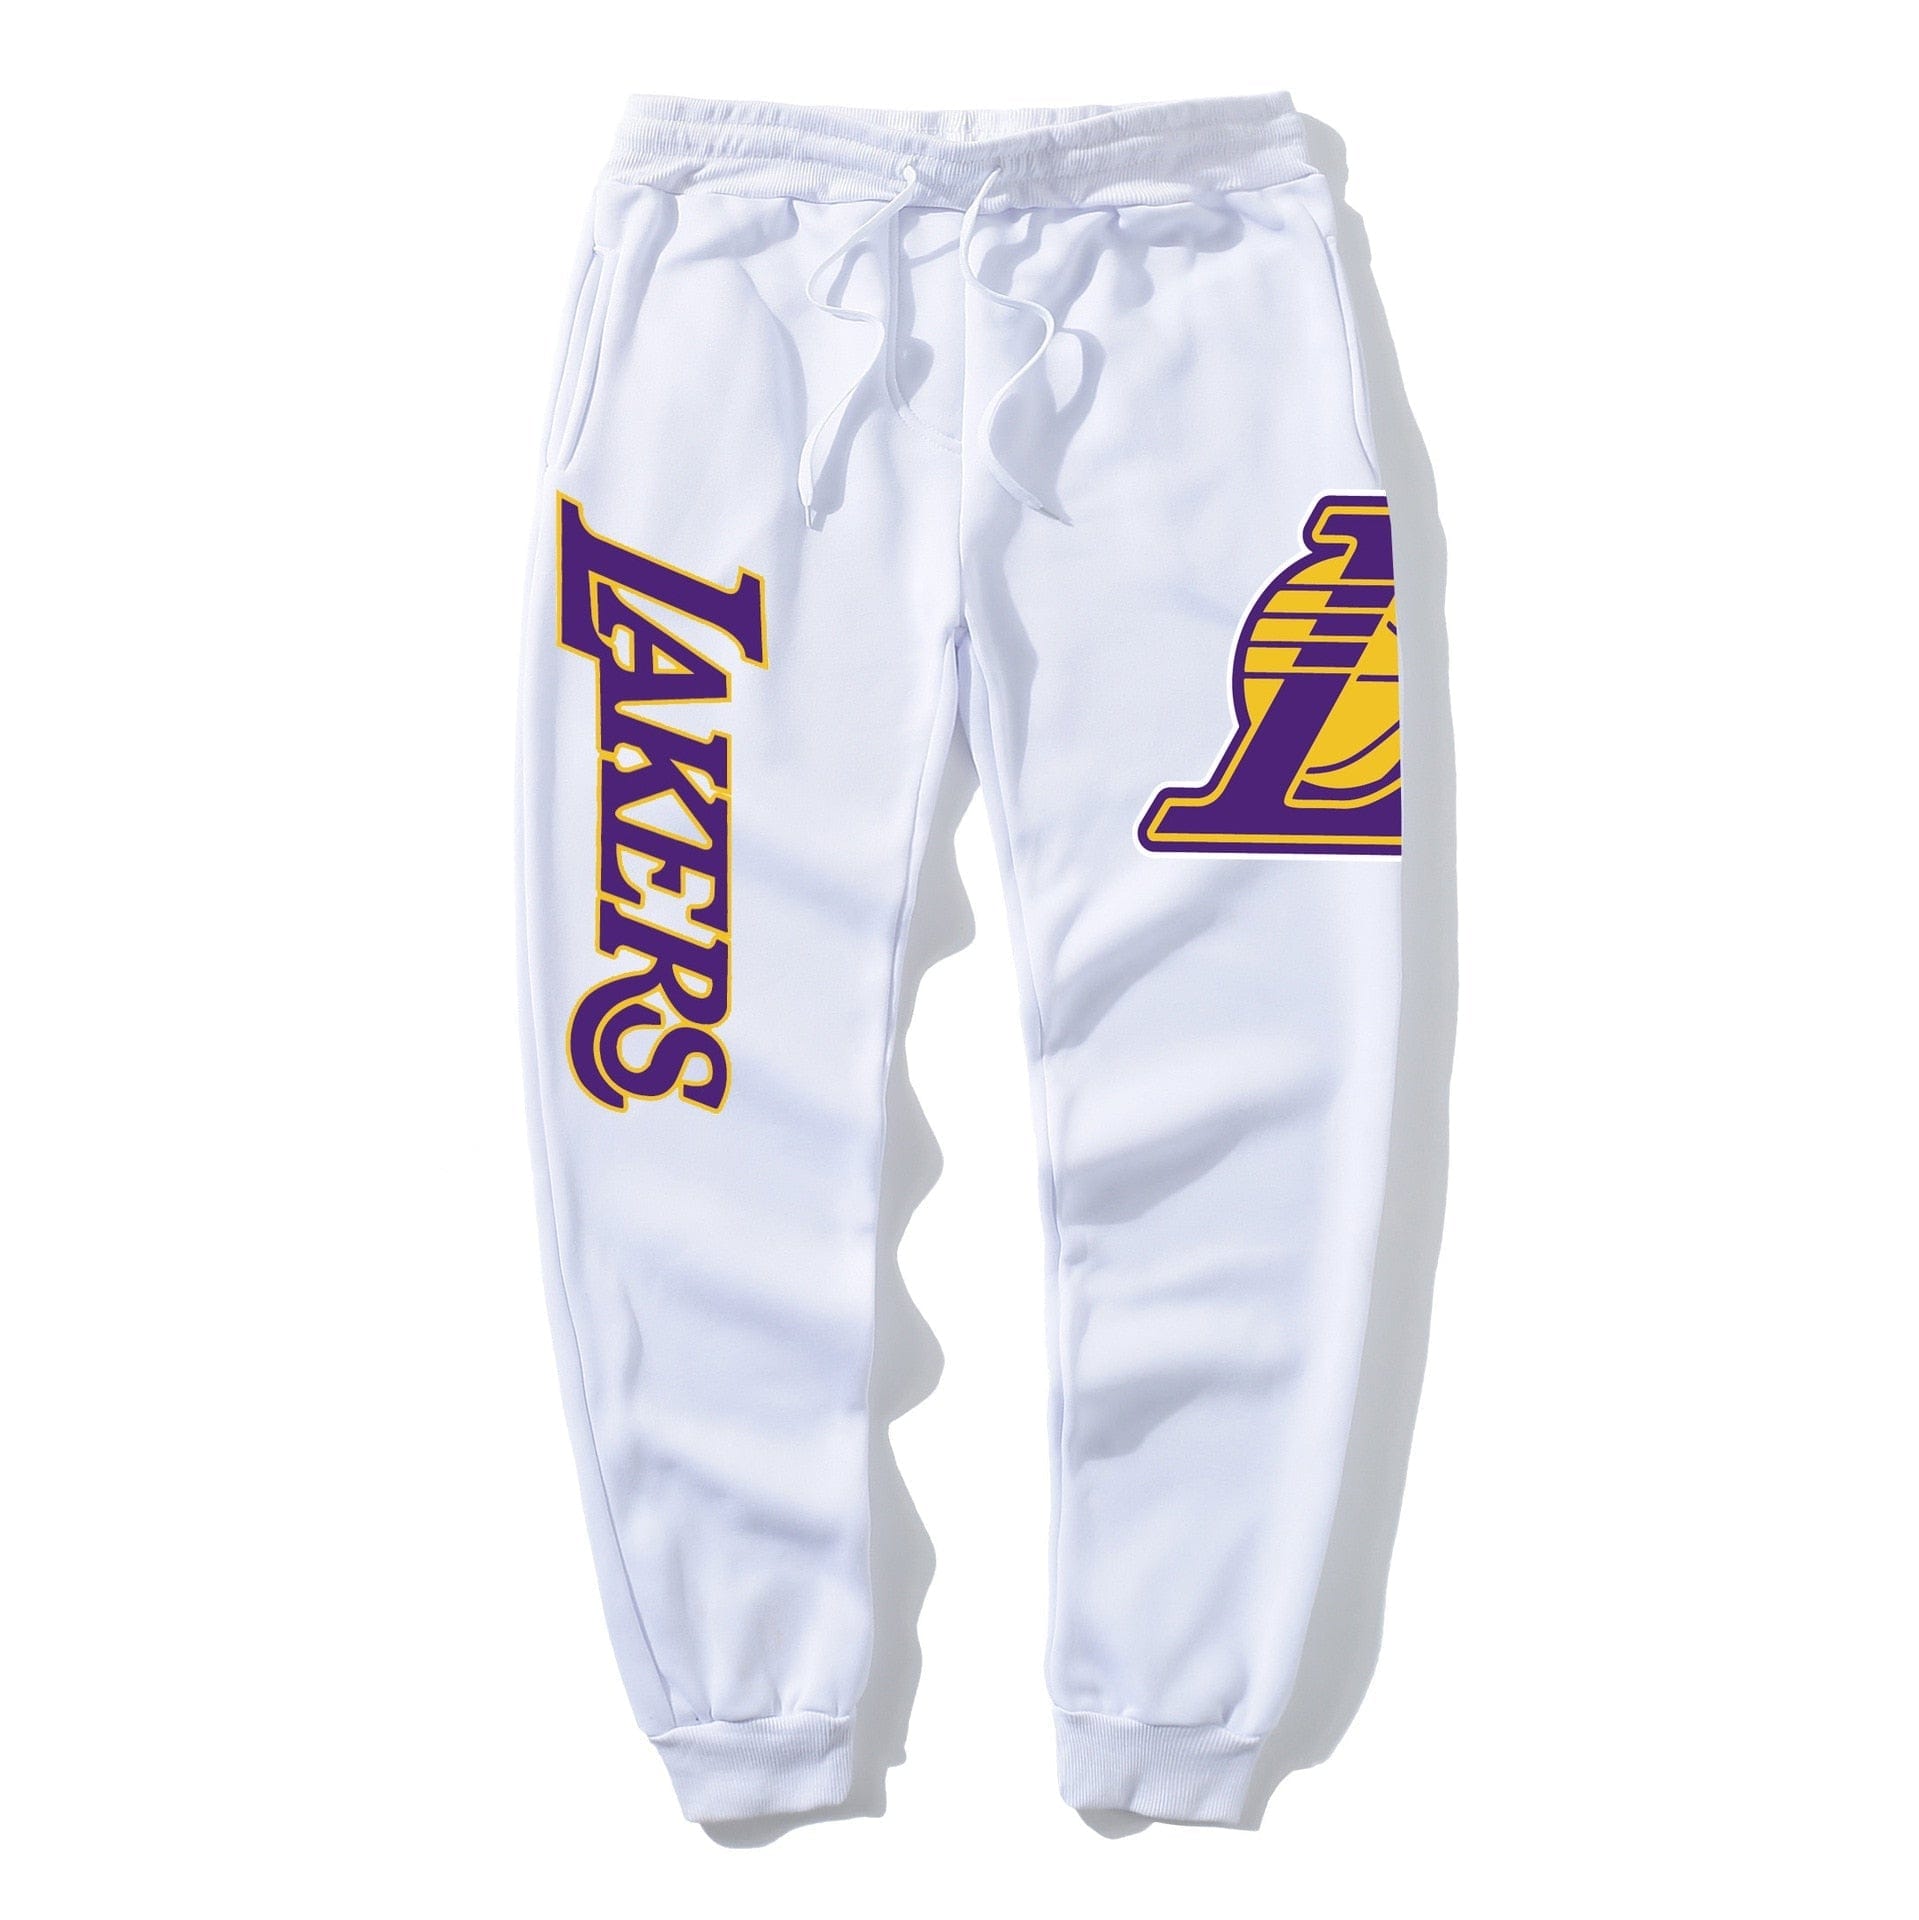 lakers 3xl